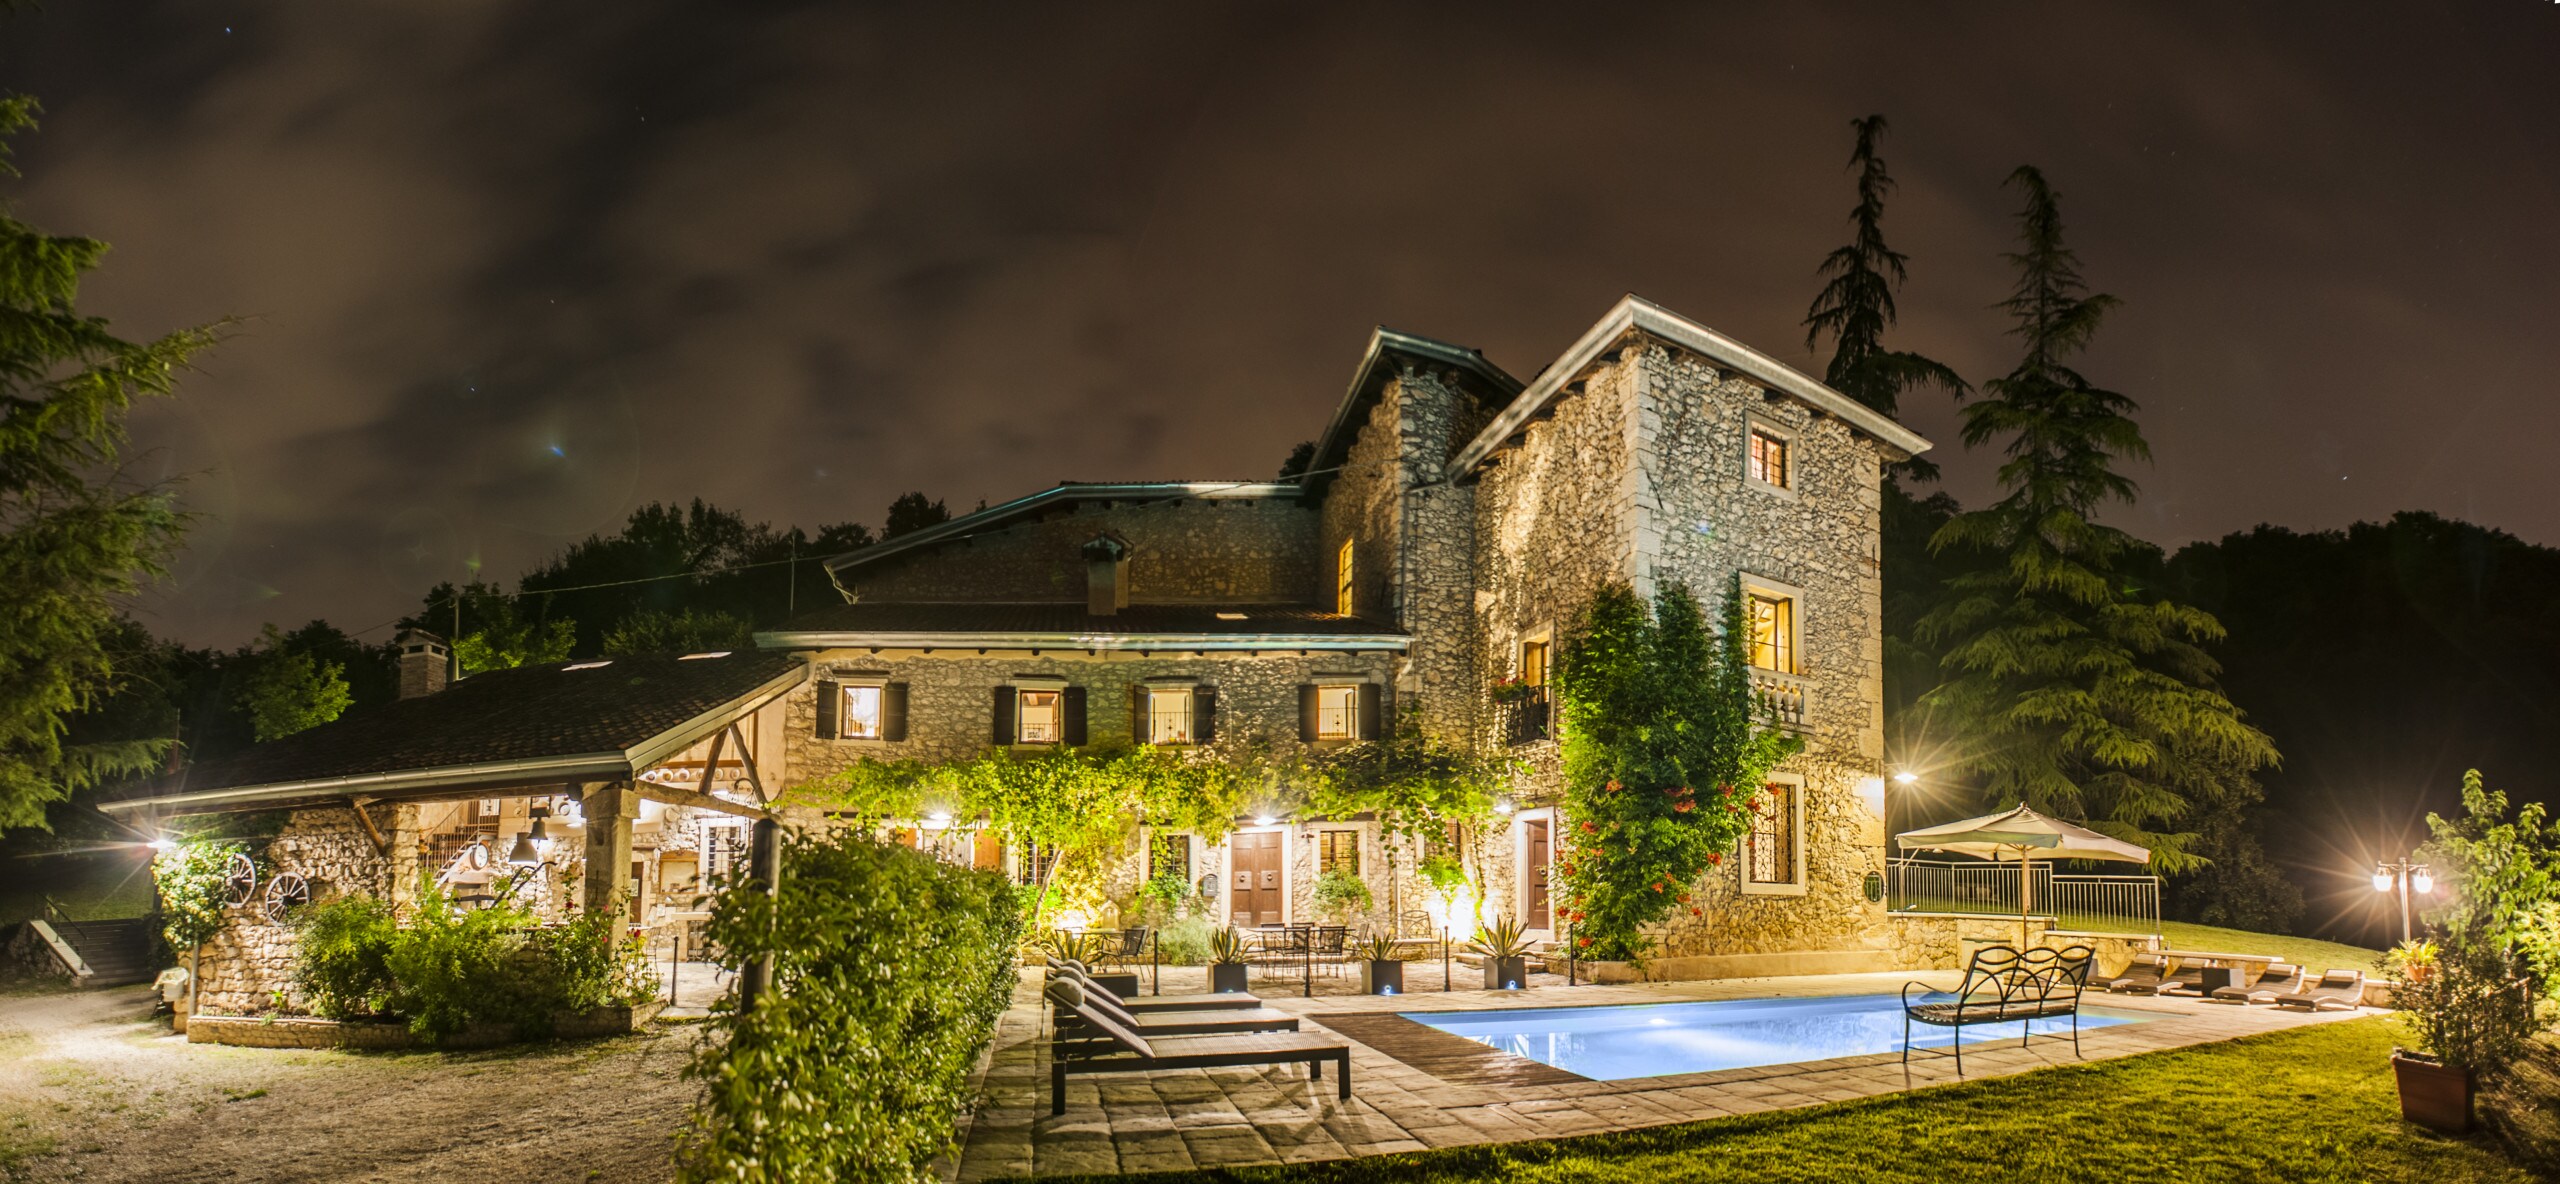 Property Image 1 - Rustic Historic Villa Dating back to 1200 with Pool